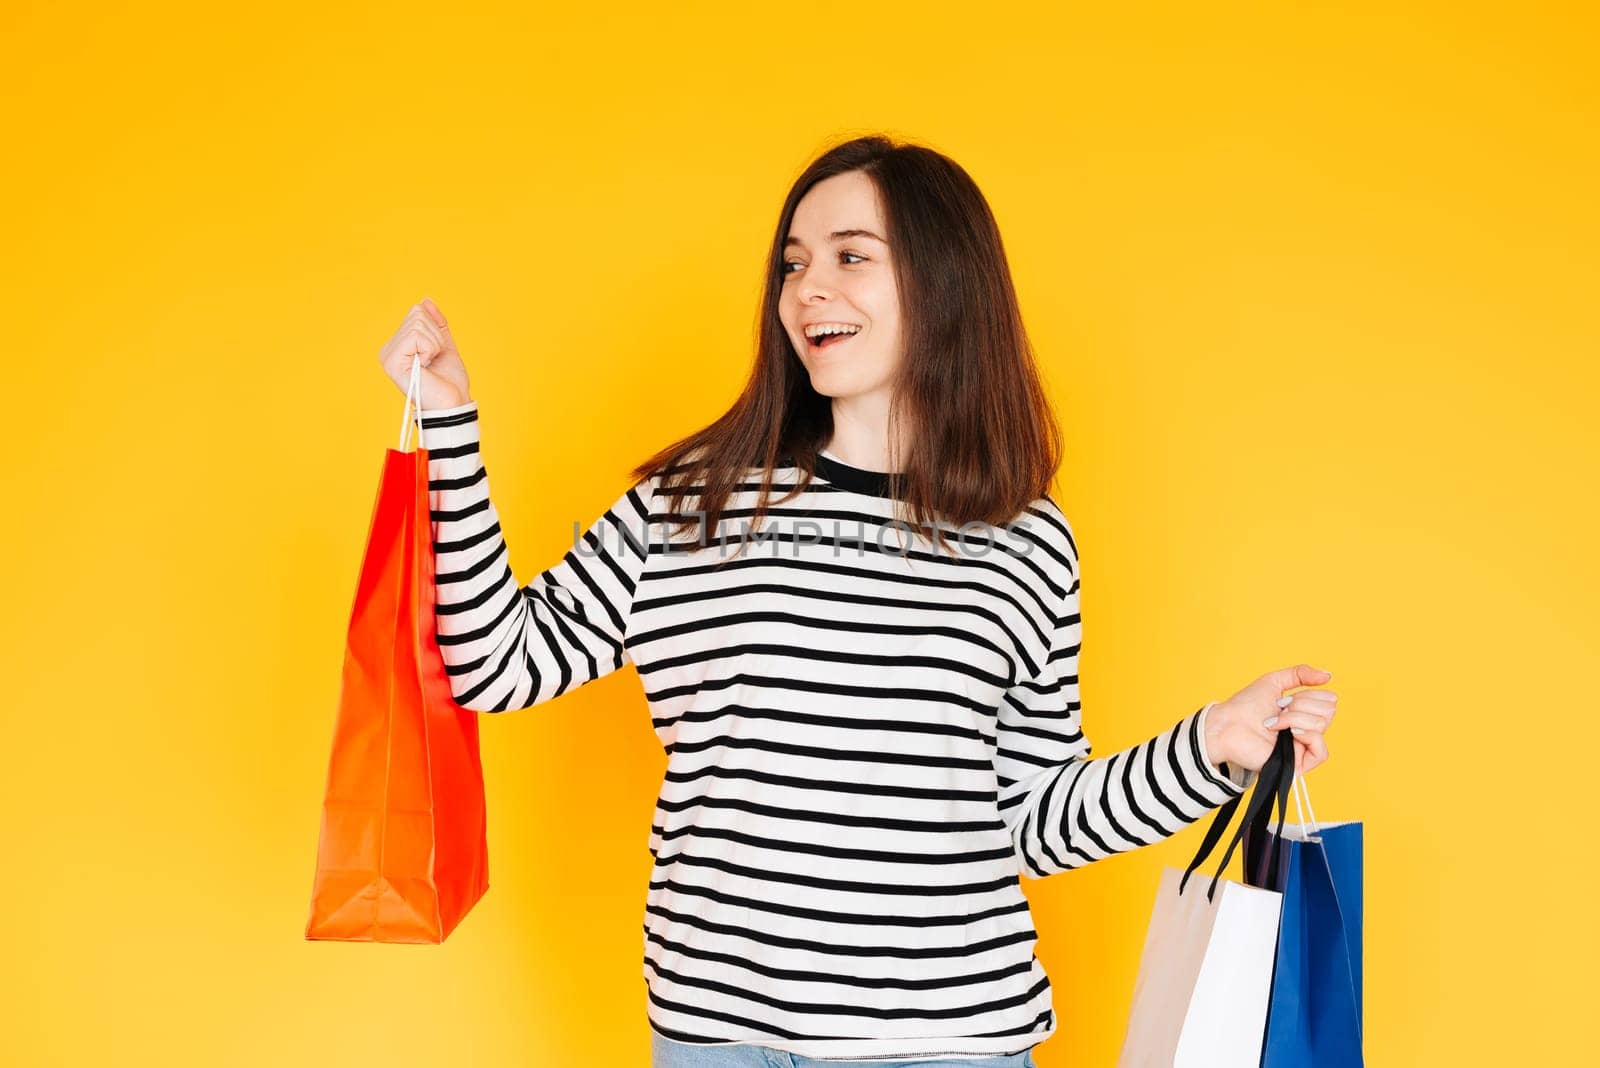 Delighted Shopper Concept: Captivating Woman Excited About Bargains and Discounts, Looking at Empty Space - Shopping Spree Mood Isolated on Vibrant Yellow Background.